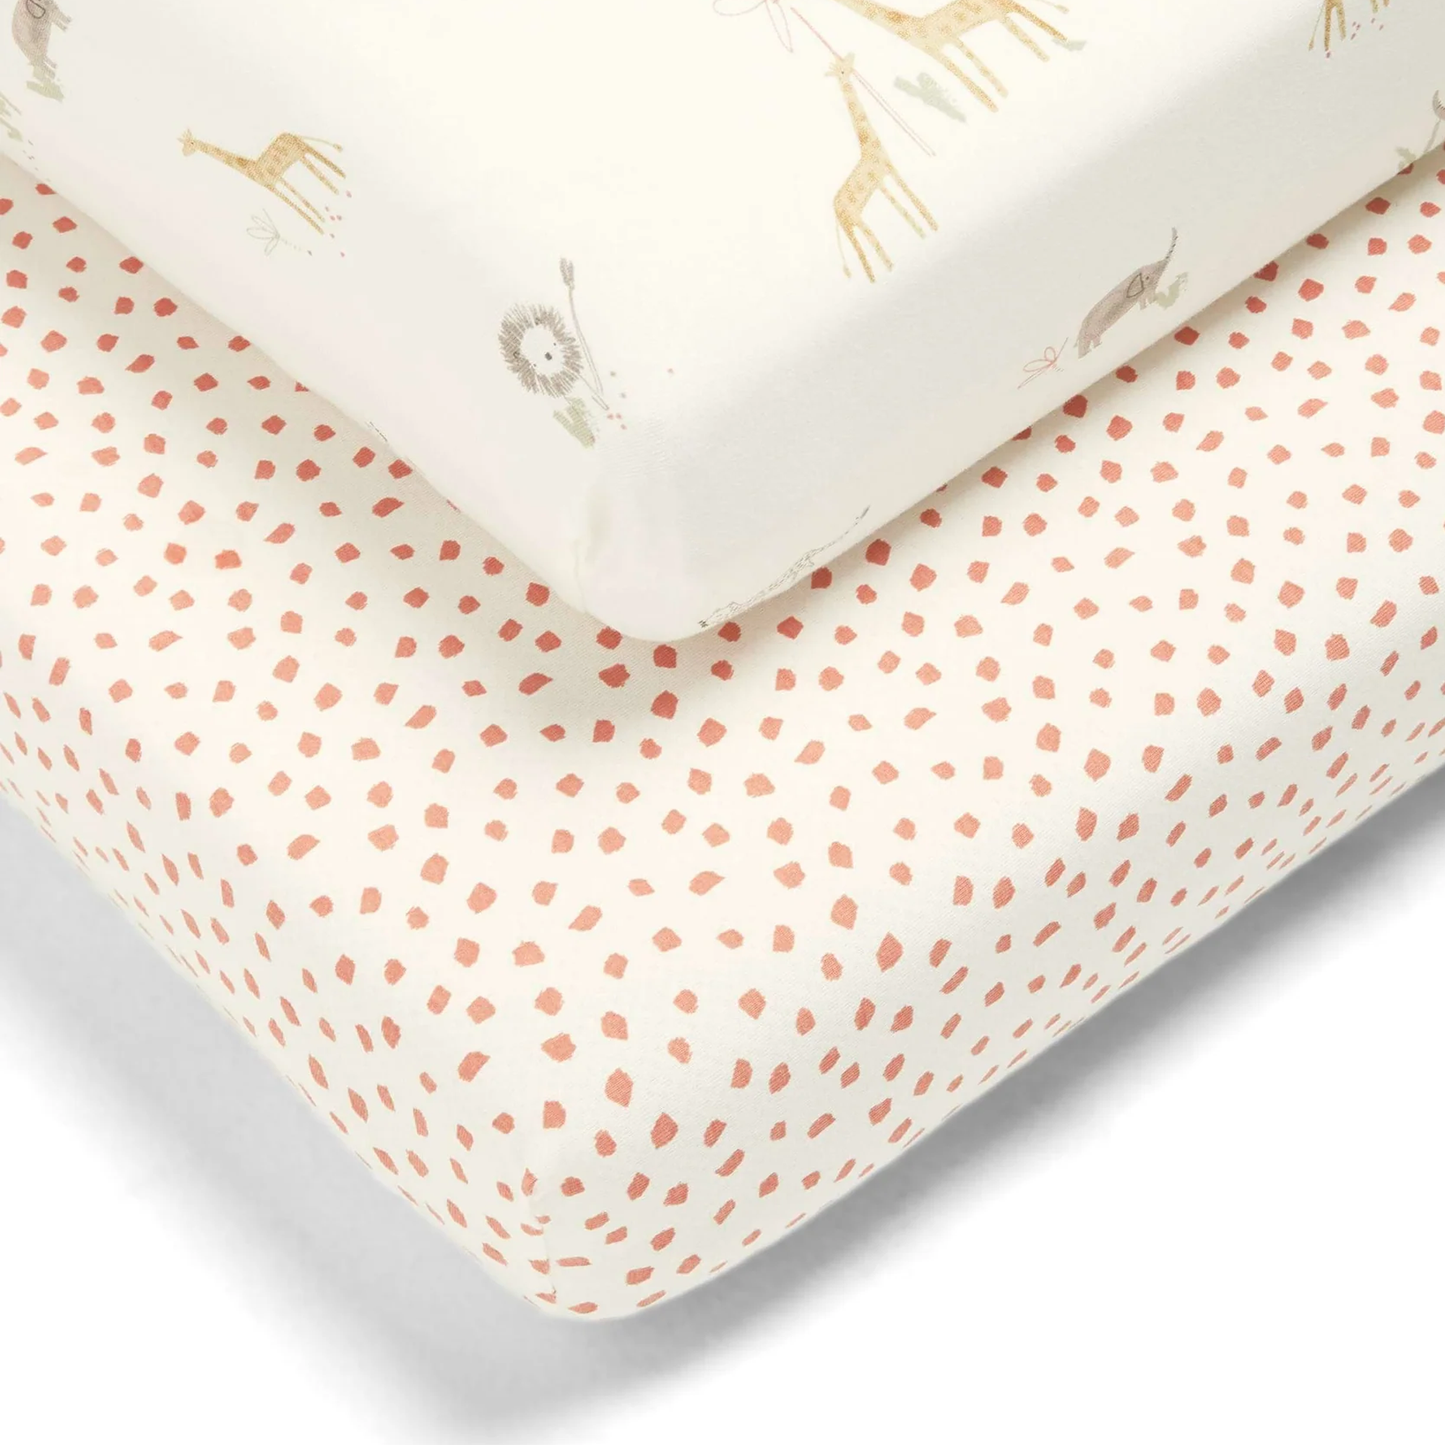 Mamas & Papas Cot/Bed Fitted Sheets - 2 Pack